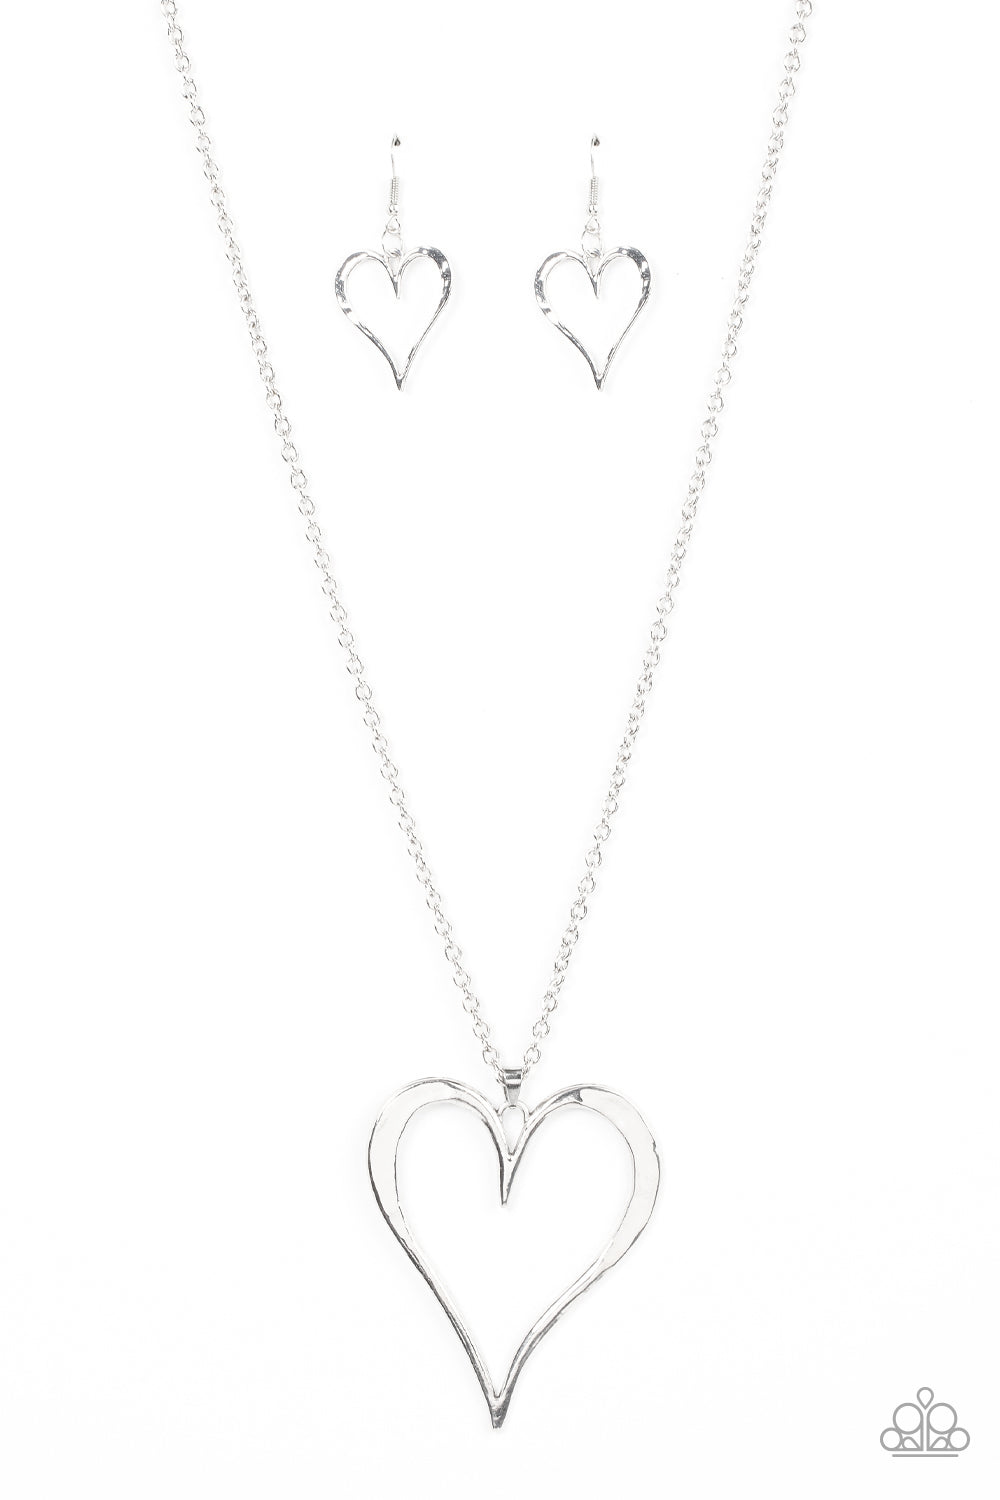 Paparazzi Hopelessly In Love Heart Necklaces